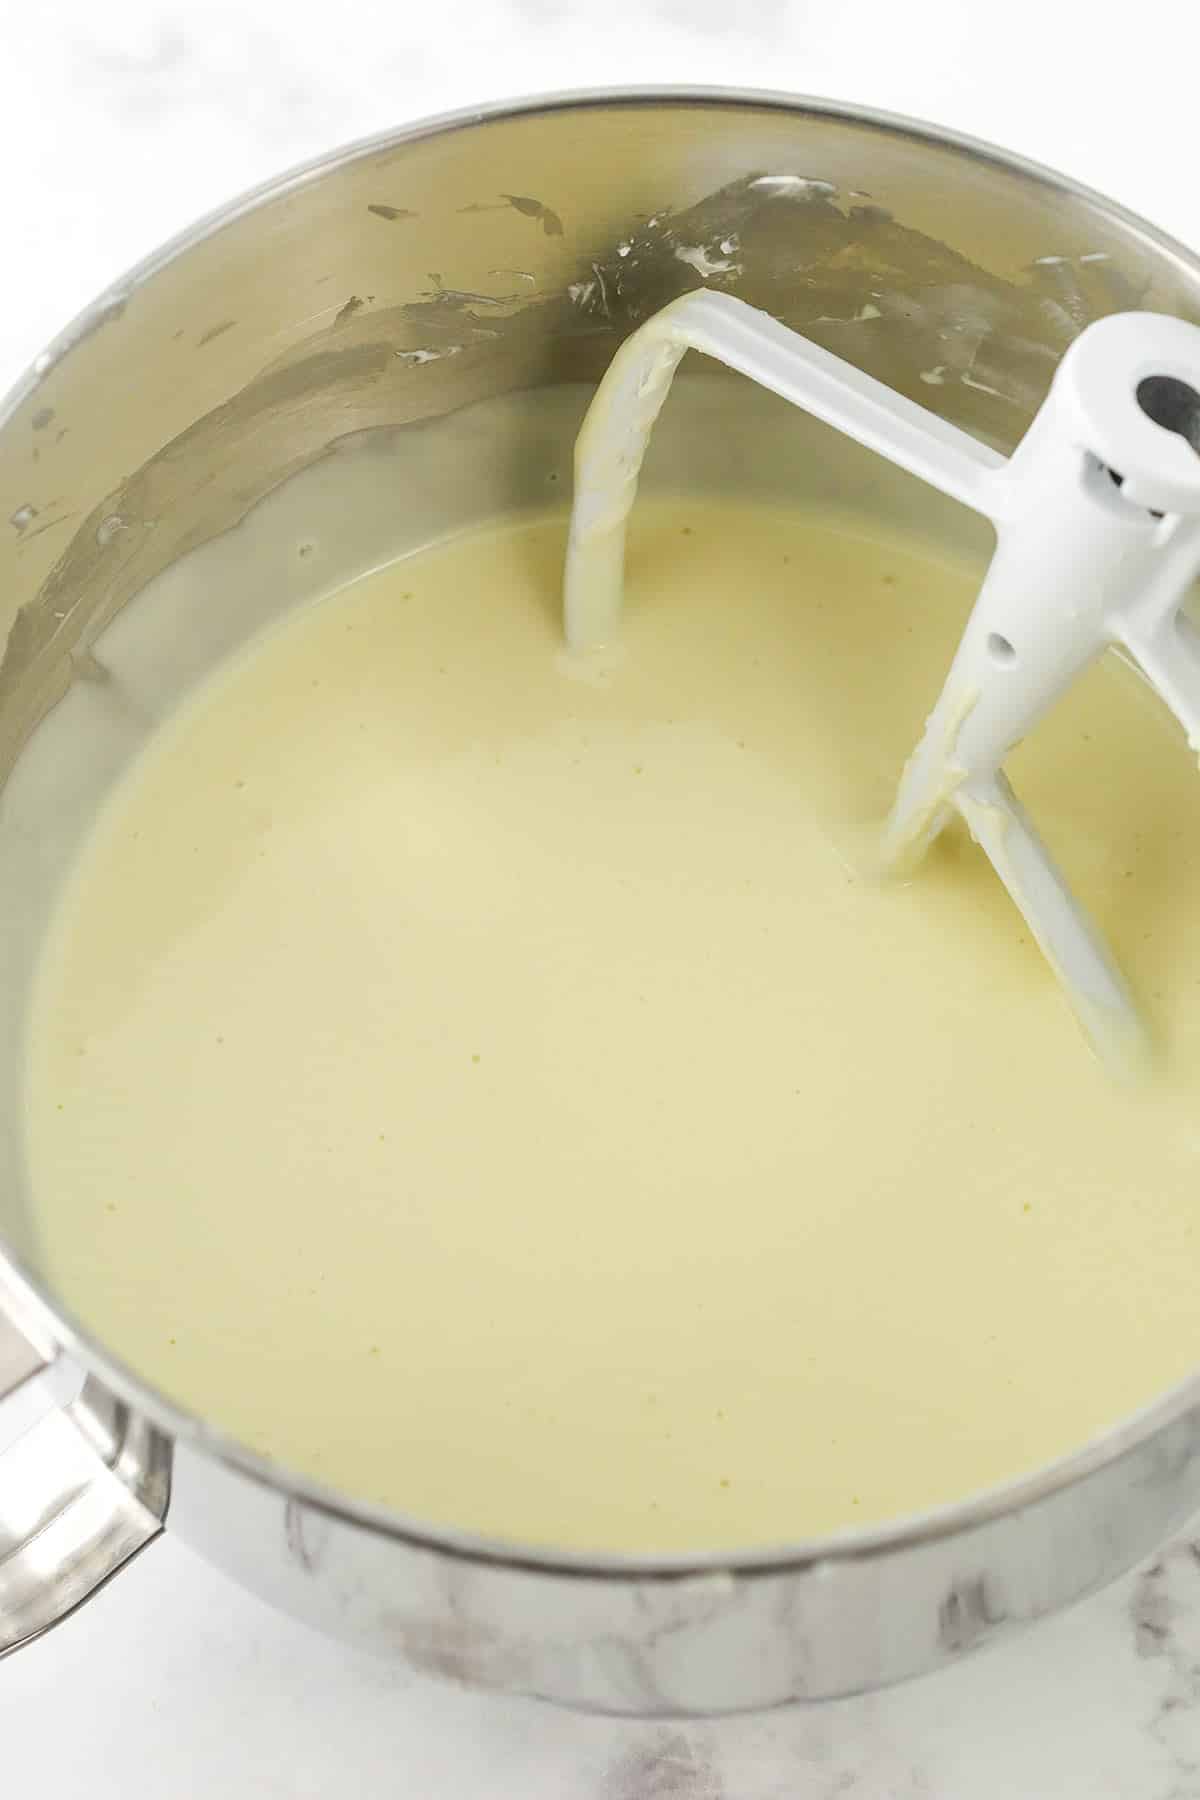 Vanilla cheesecake batter in a mixing bowl.